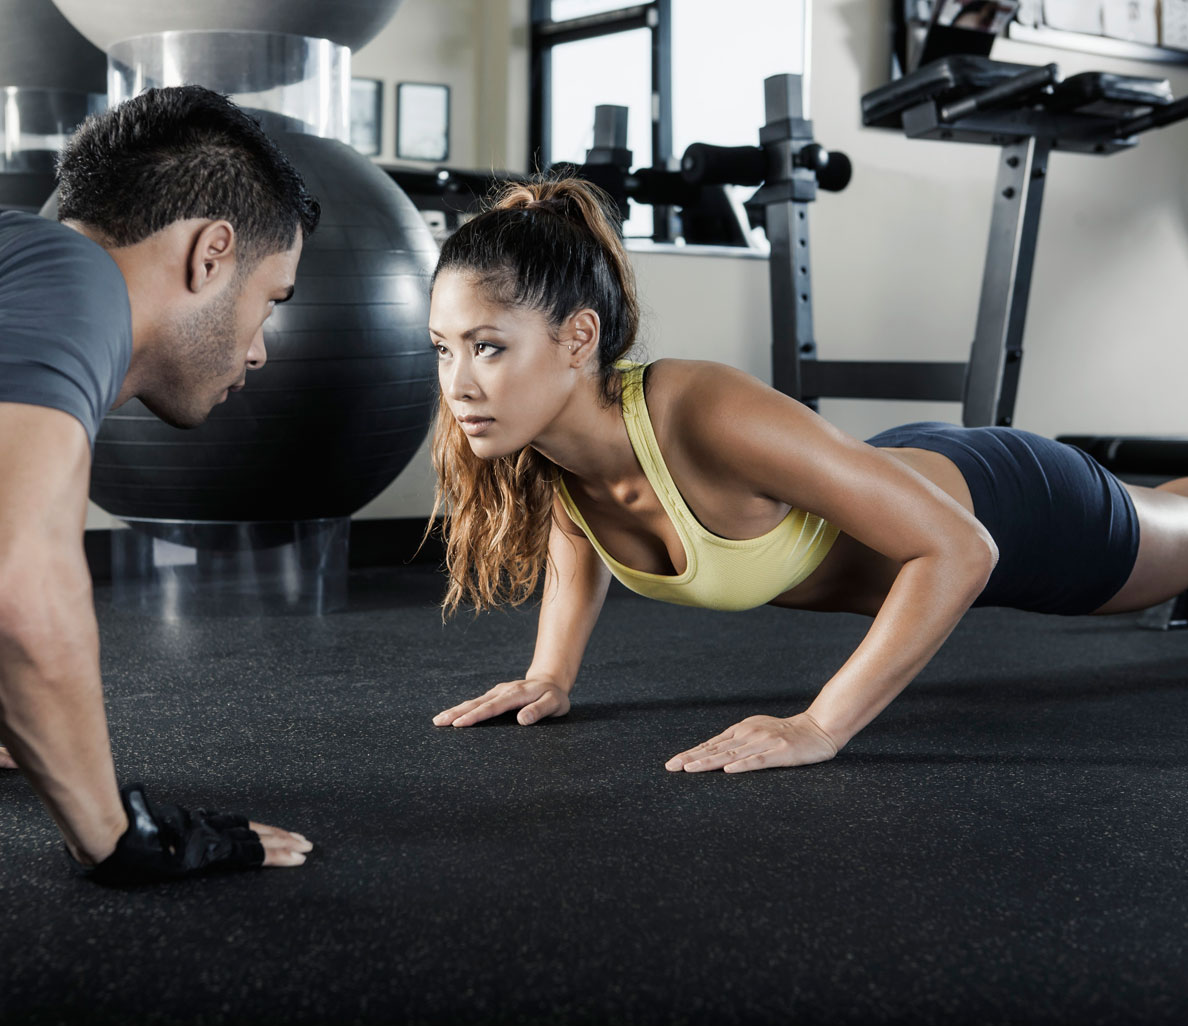 How to pick up women at the gym, according to women image